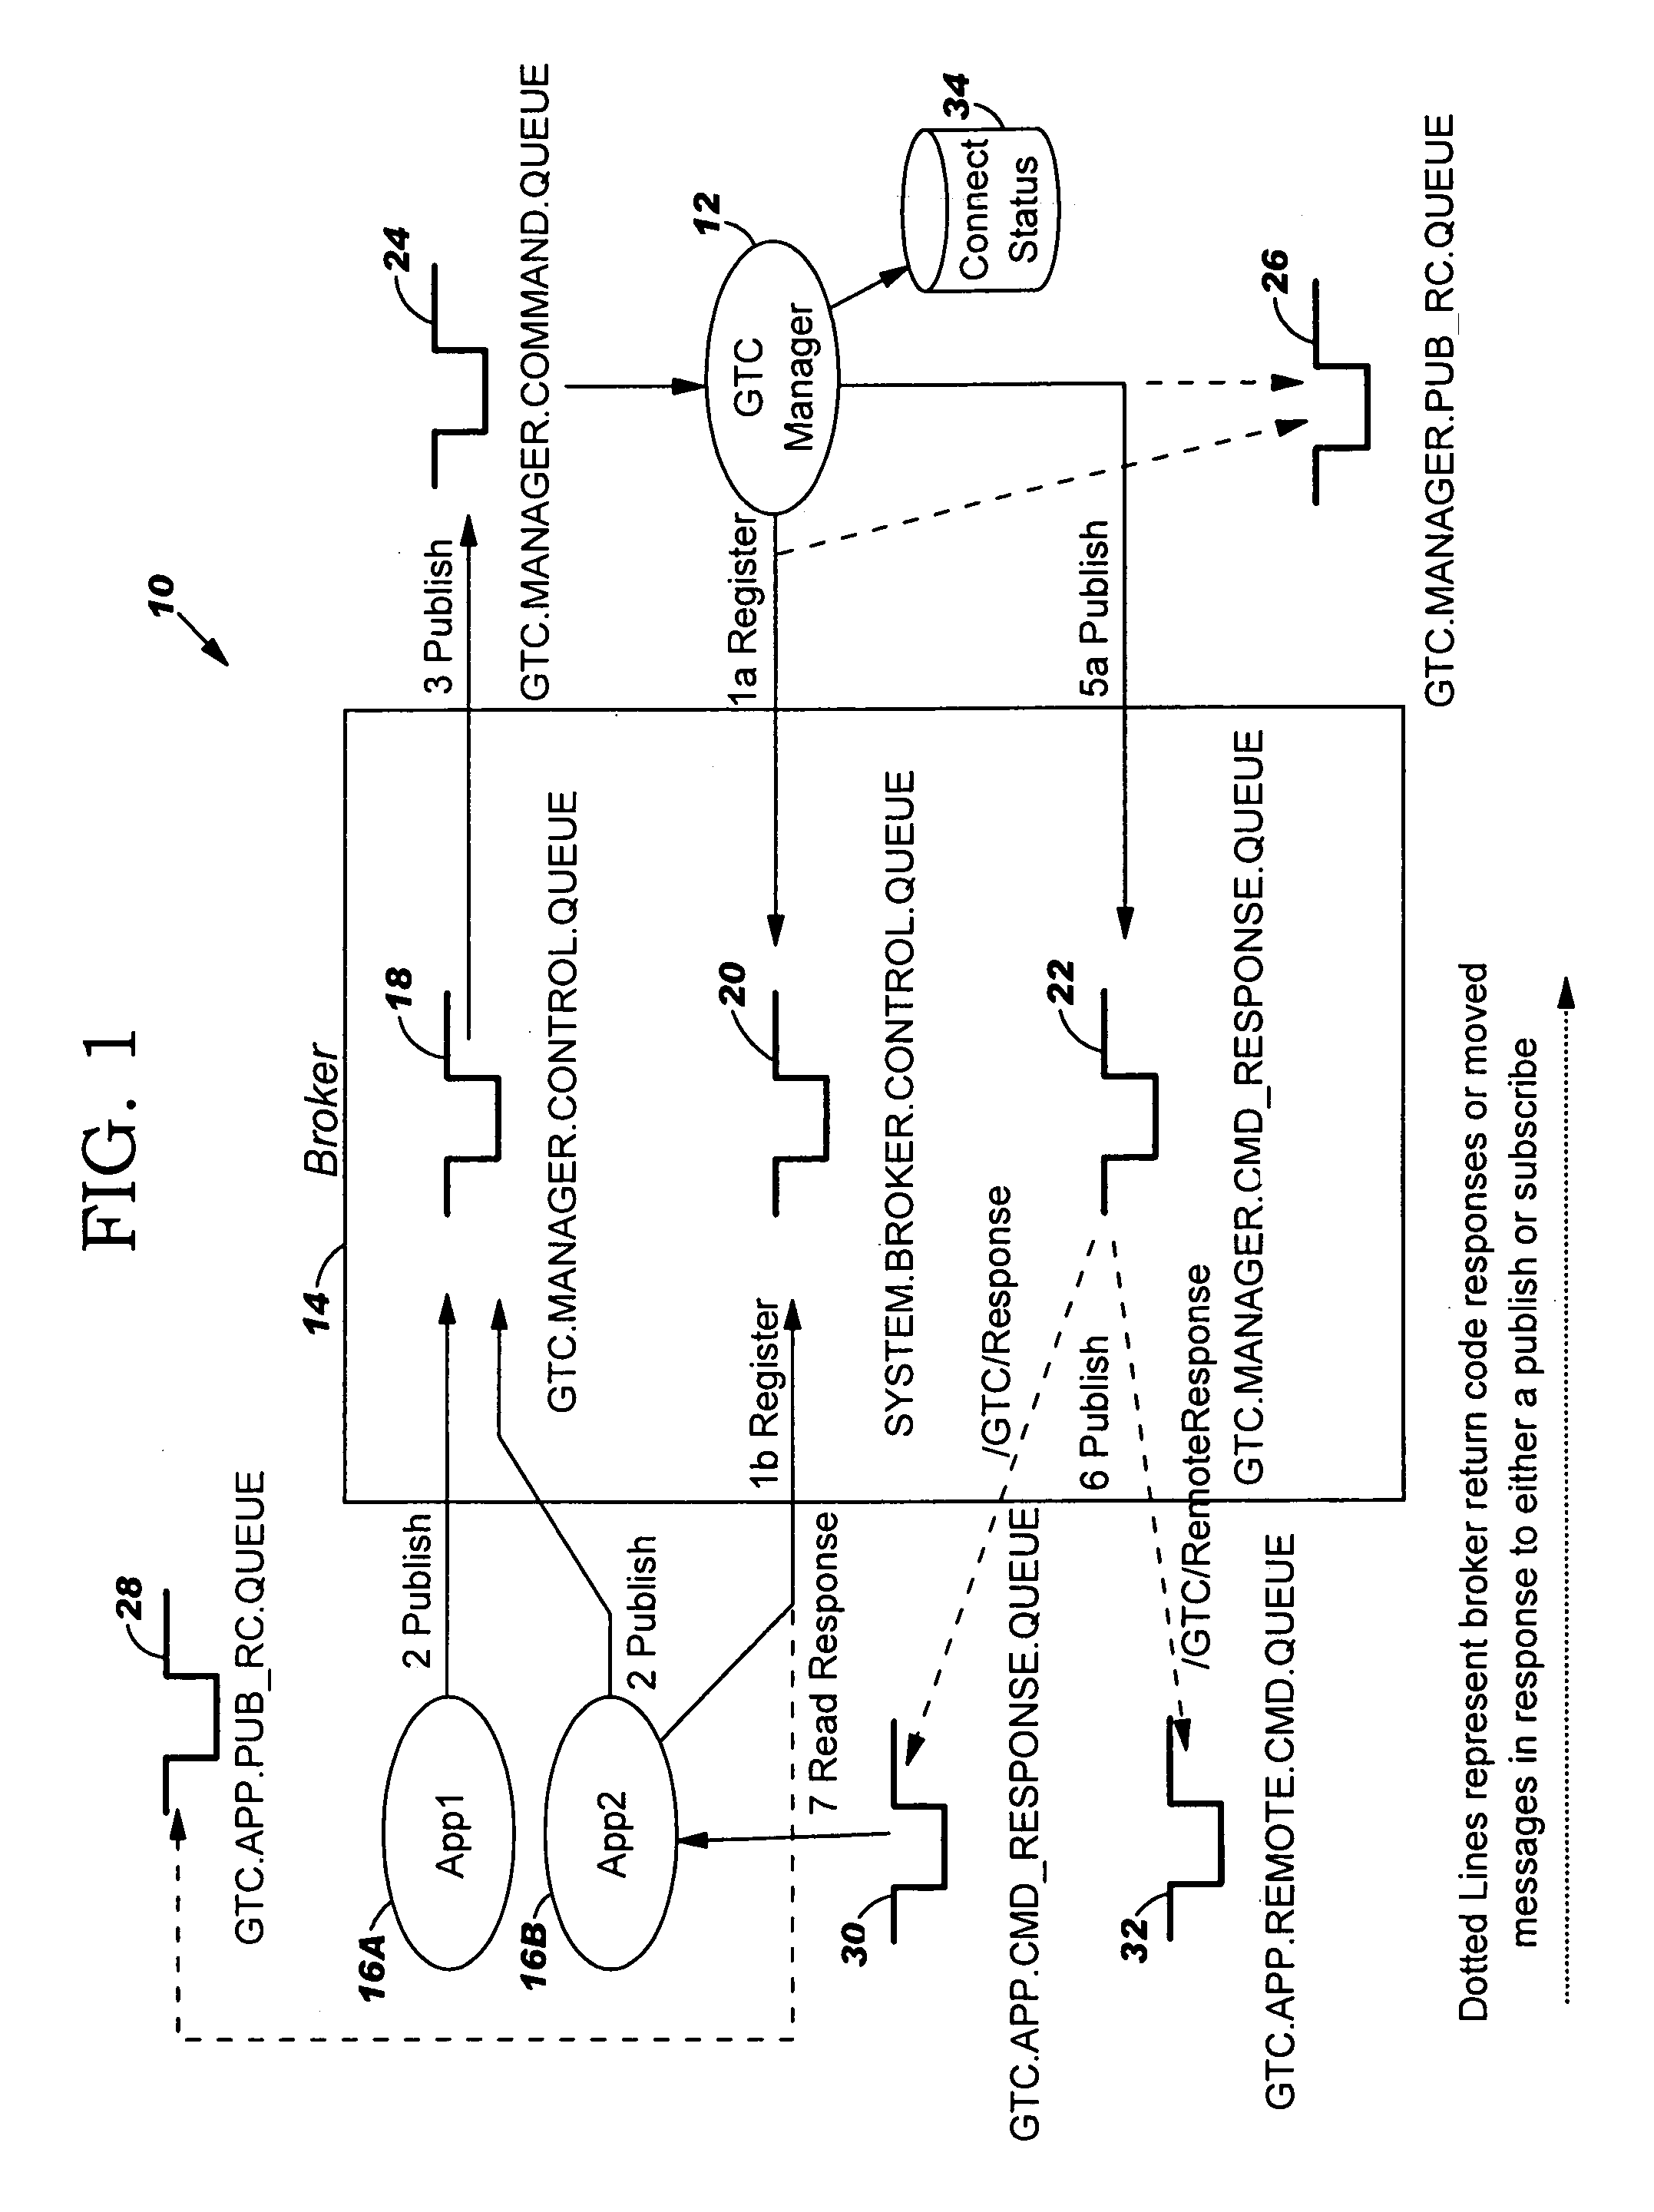 Connection manager, method, system and program product for centrally managing computer applications